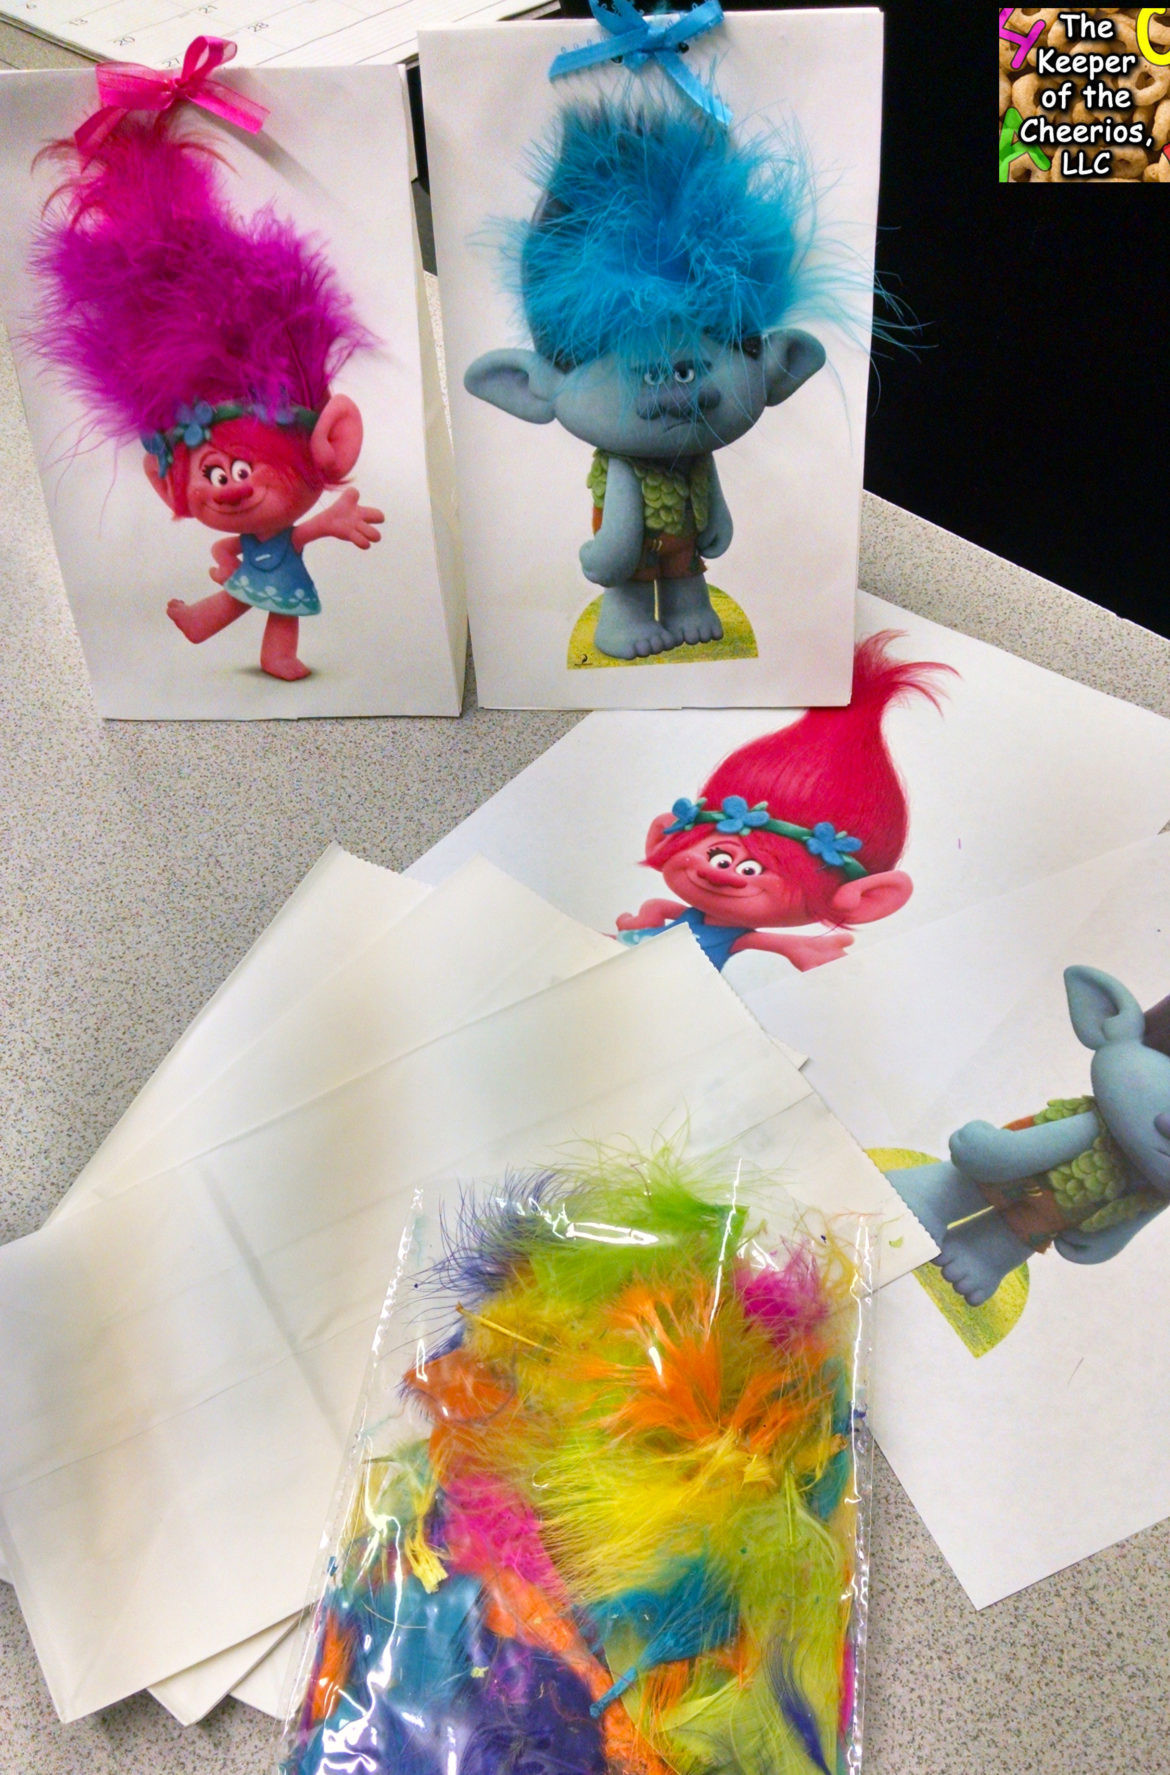 Trolls Movie Birthday Party Ideas
 TROLLS PARTY FAVOR BAGS The Keeper of the Cheerios